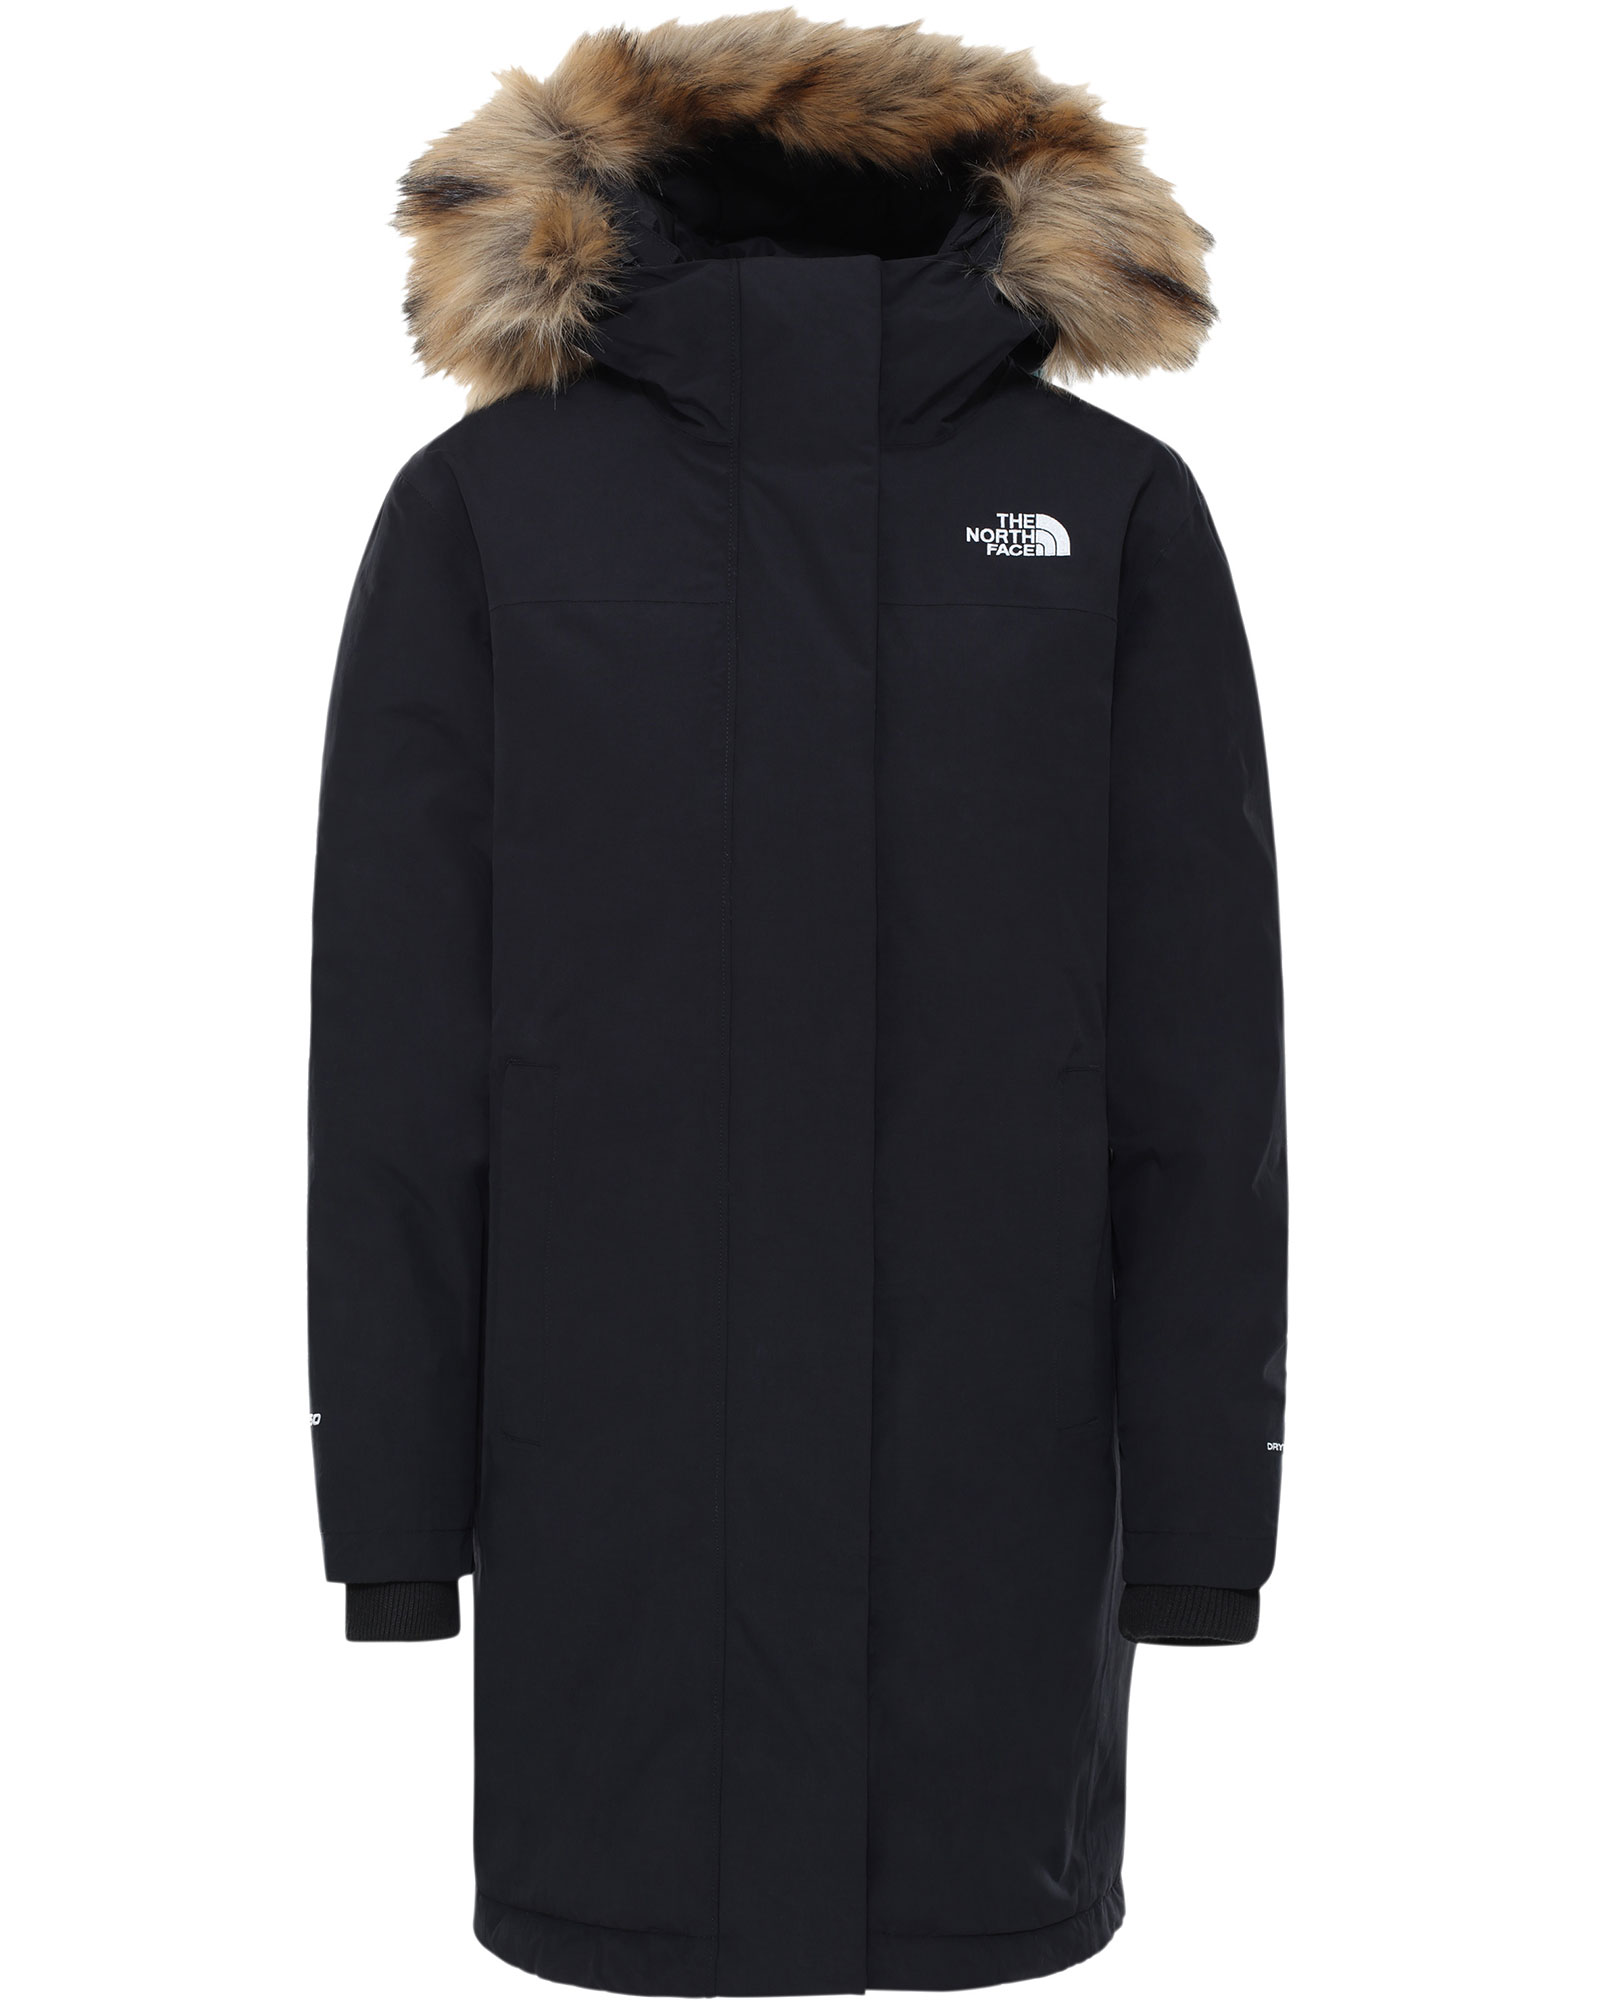 The North Face Arctic Womens Parka Jacket